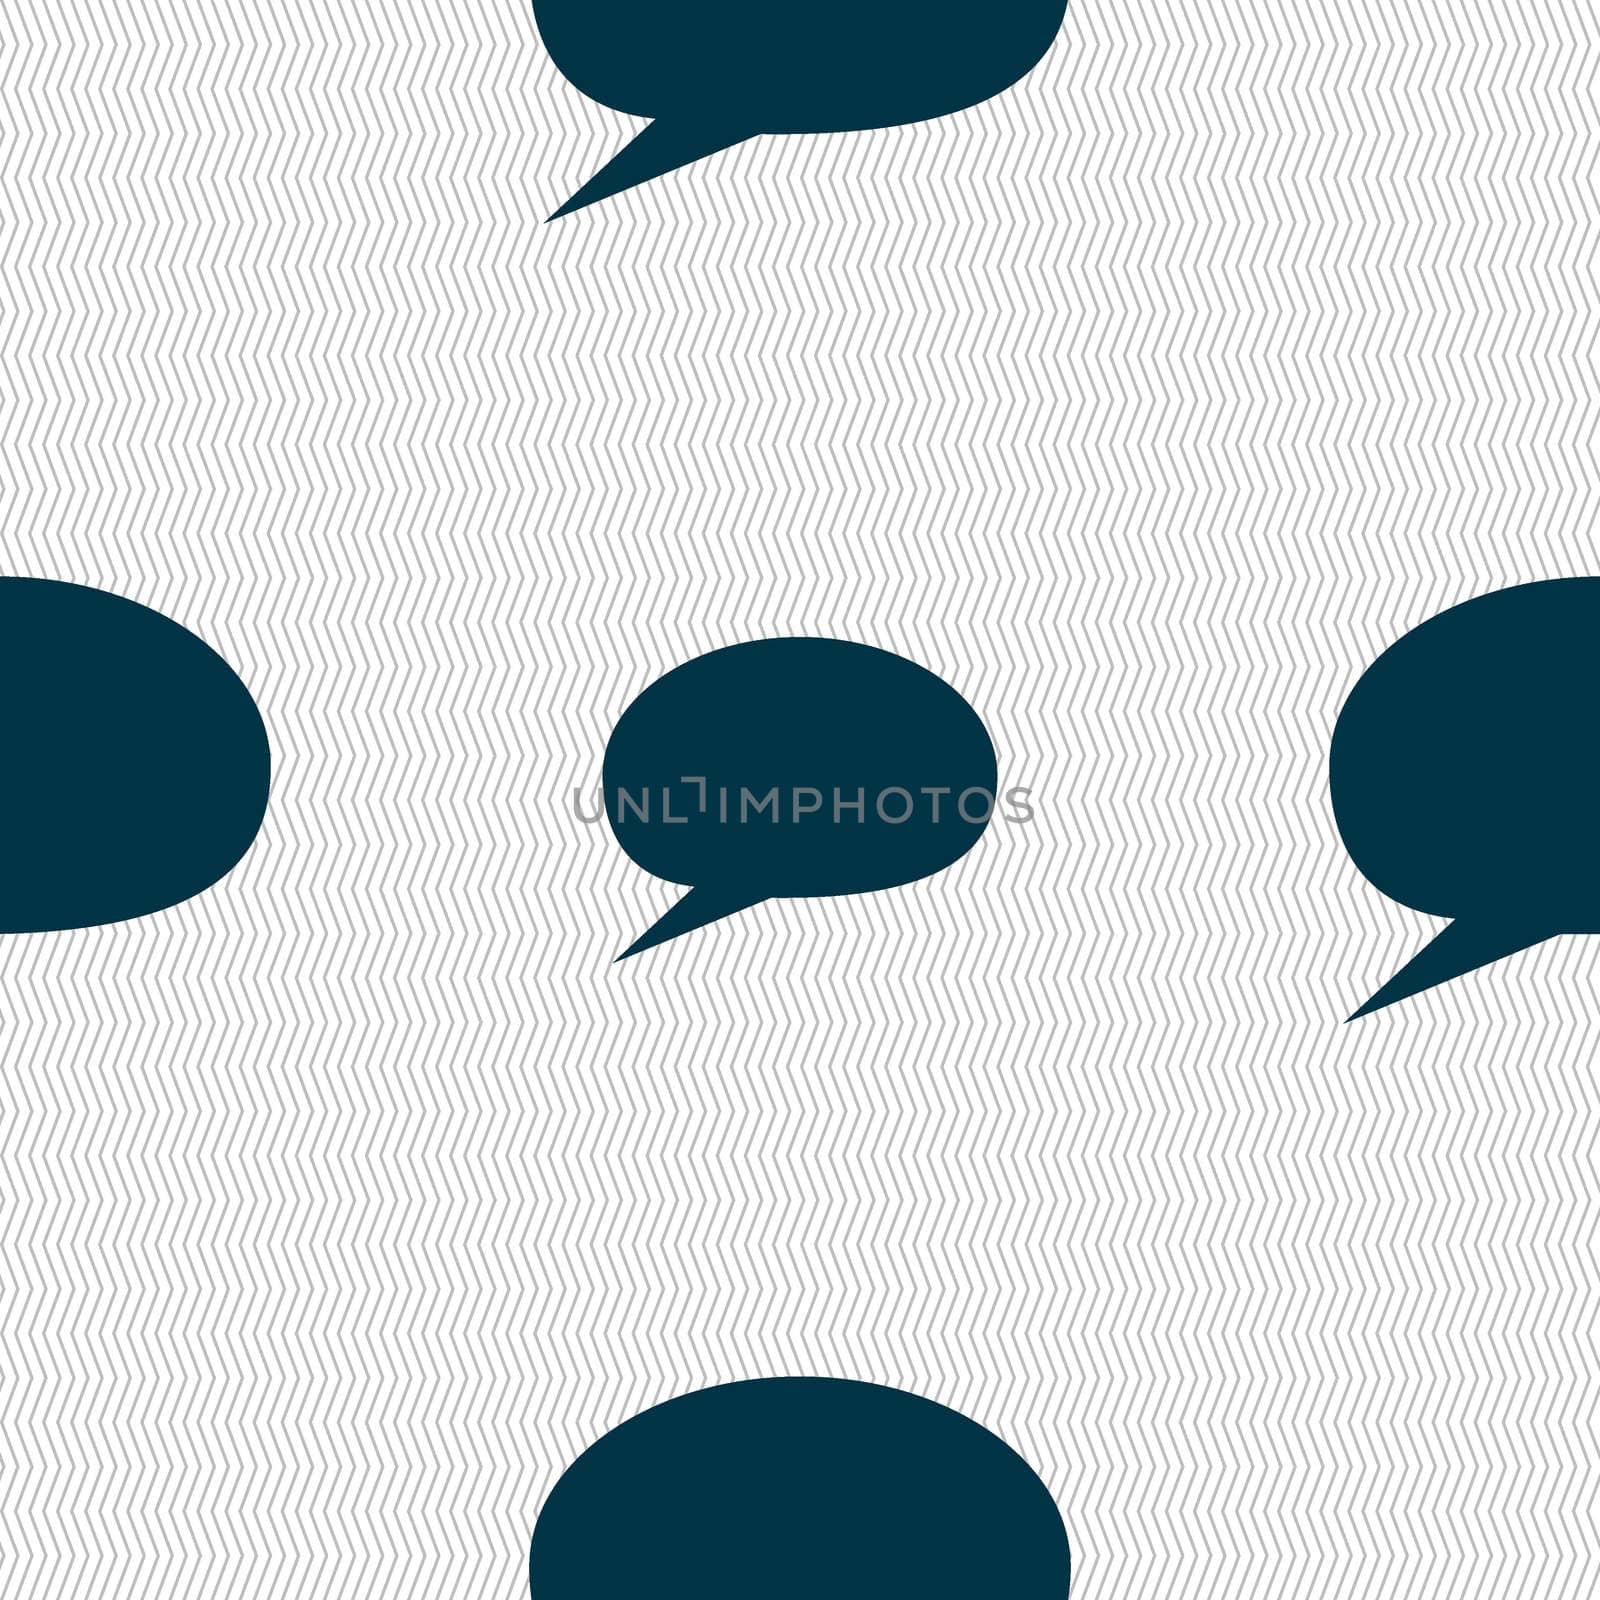 Speech bubble icons. Think cloud symbols. Seamless abstract background with geometric shapes.  by serhii_lohvyniuk